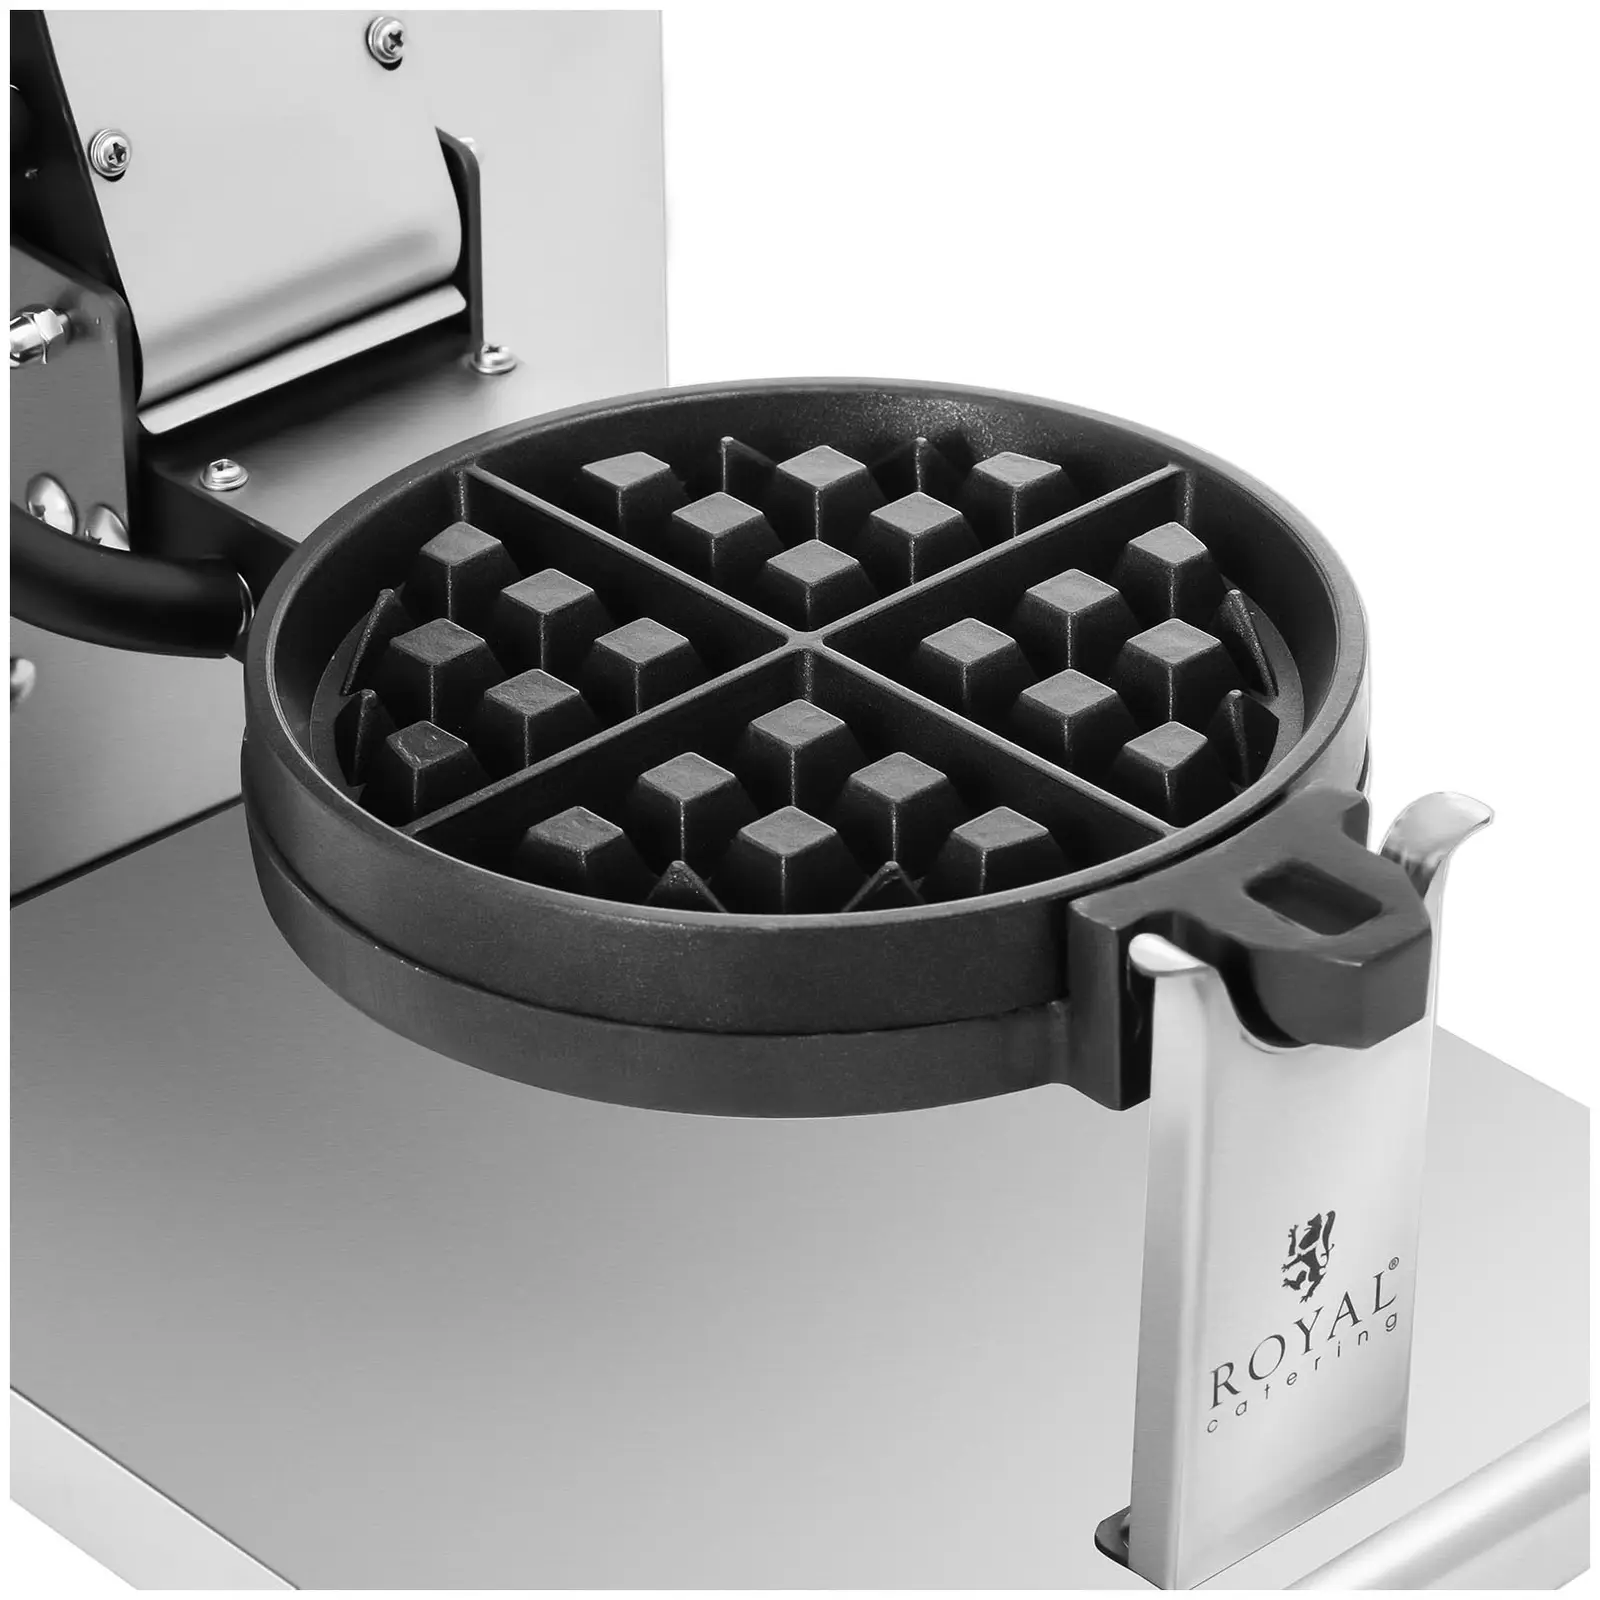 Waffle Maker - round - 4 small waffles - 1200 W - Royal Catering